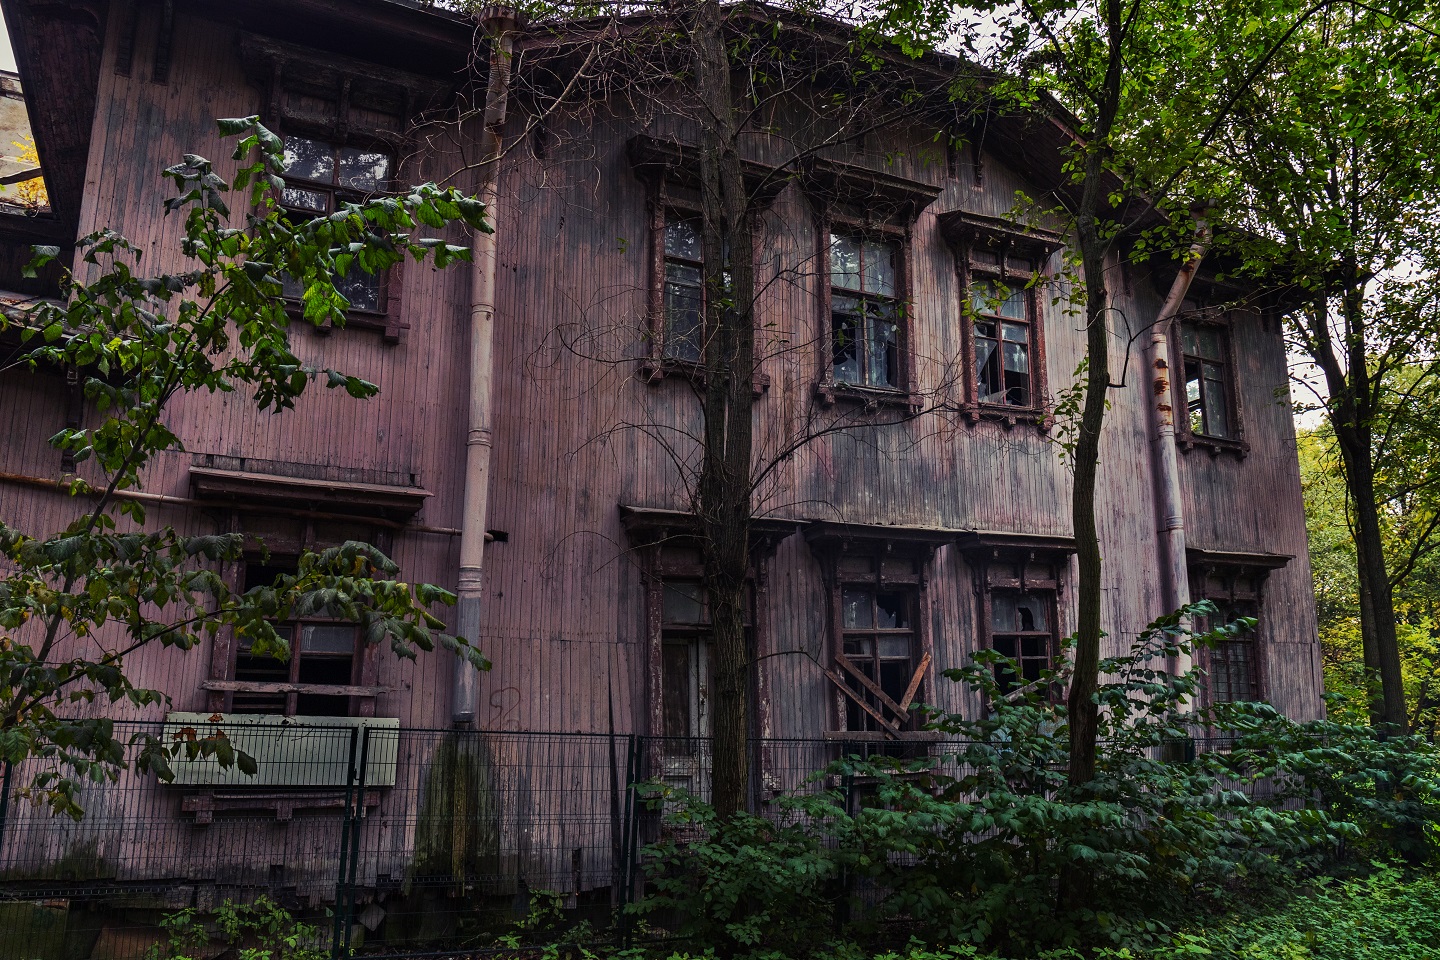 Abandoned,Old,Wooden,House,With,No,Windows